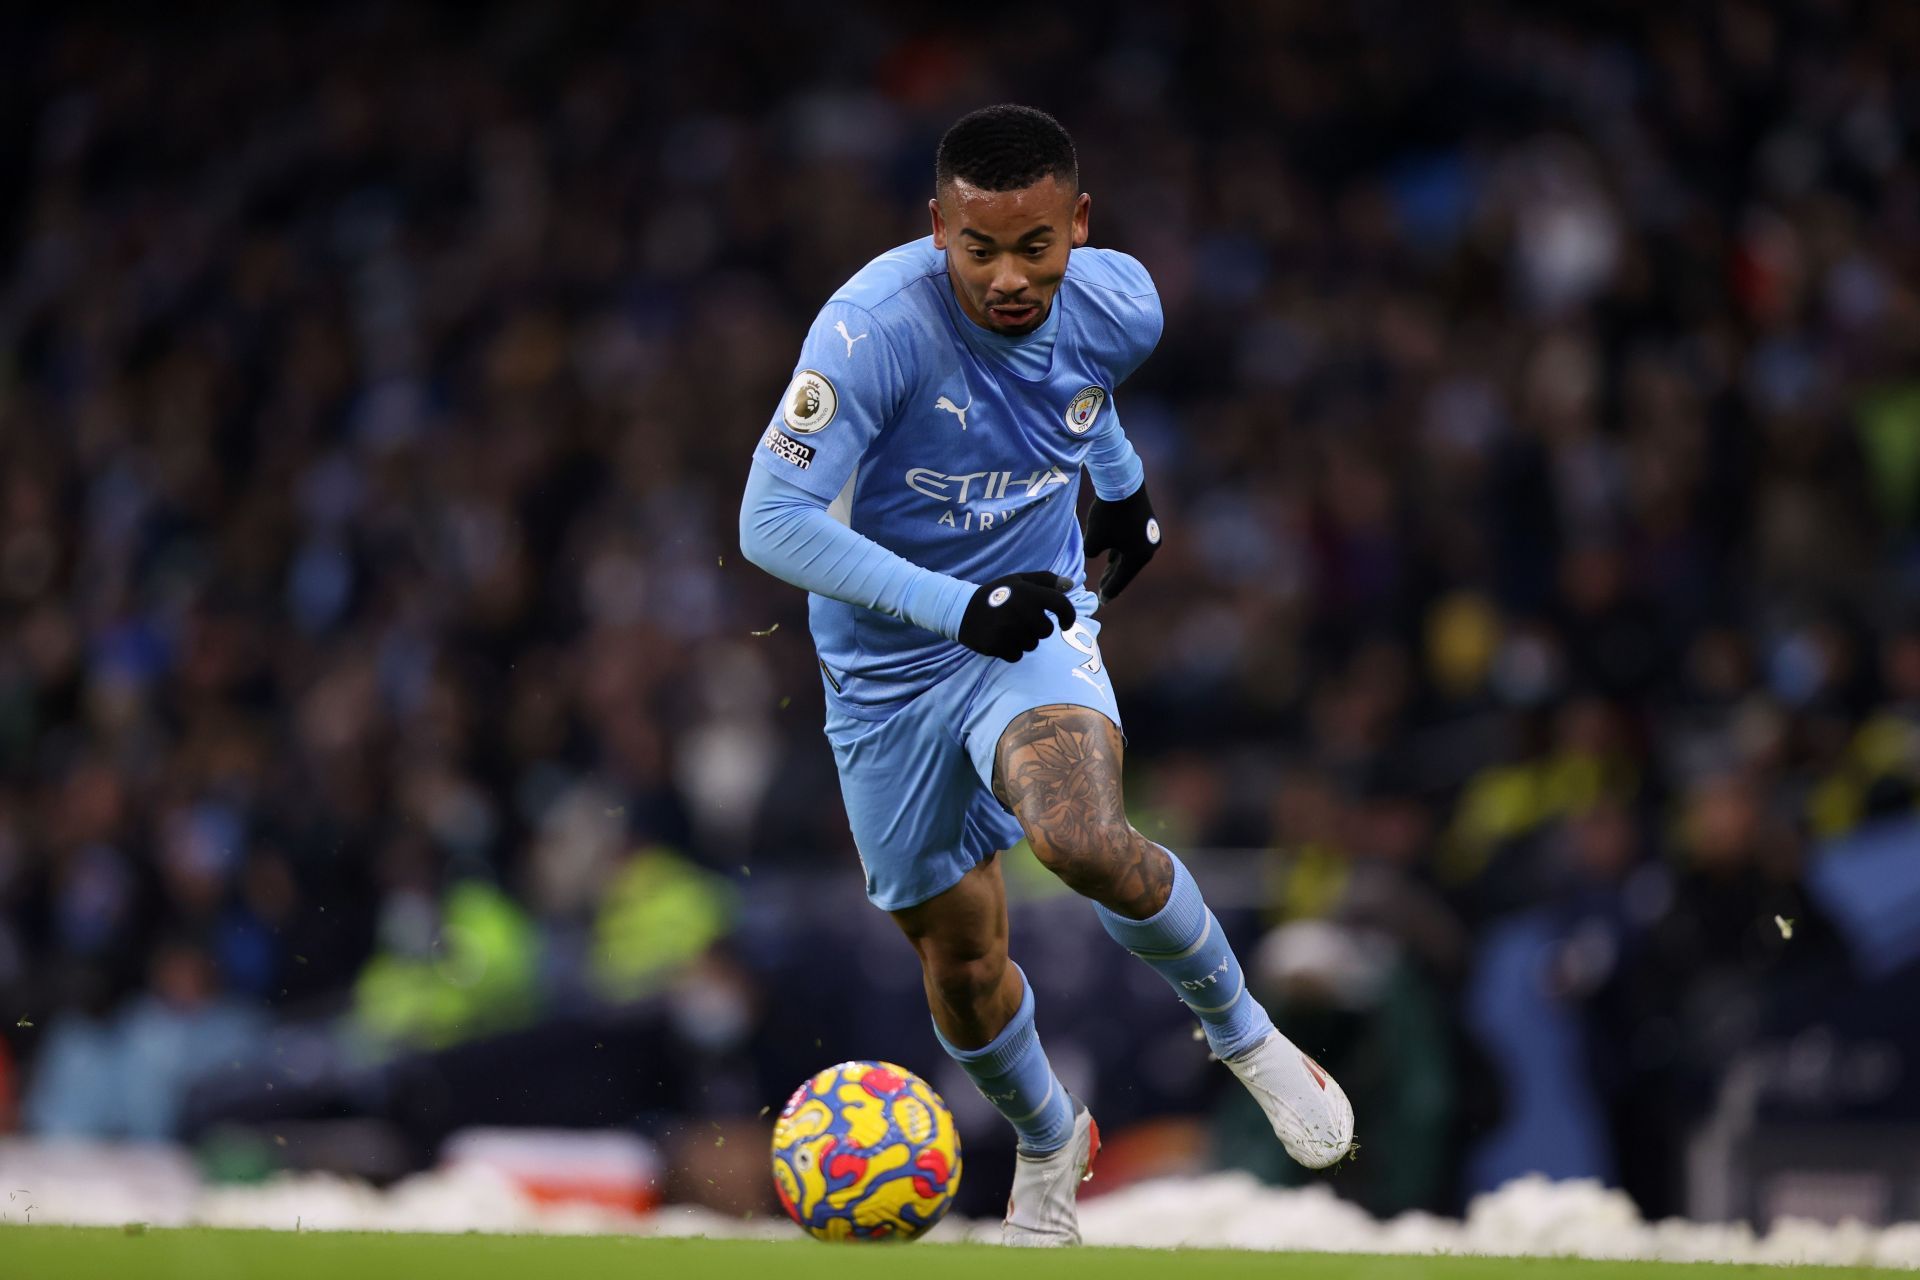 Gabriel Jesus has stepped up for City whenever called upon